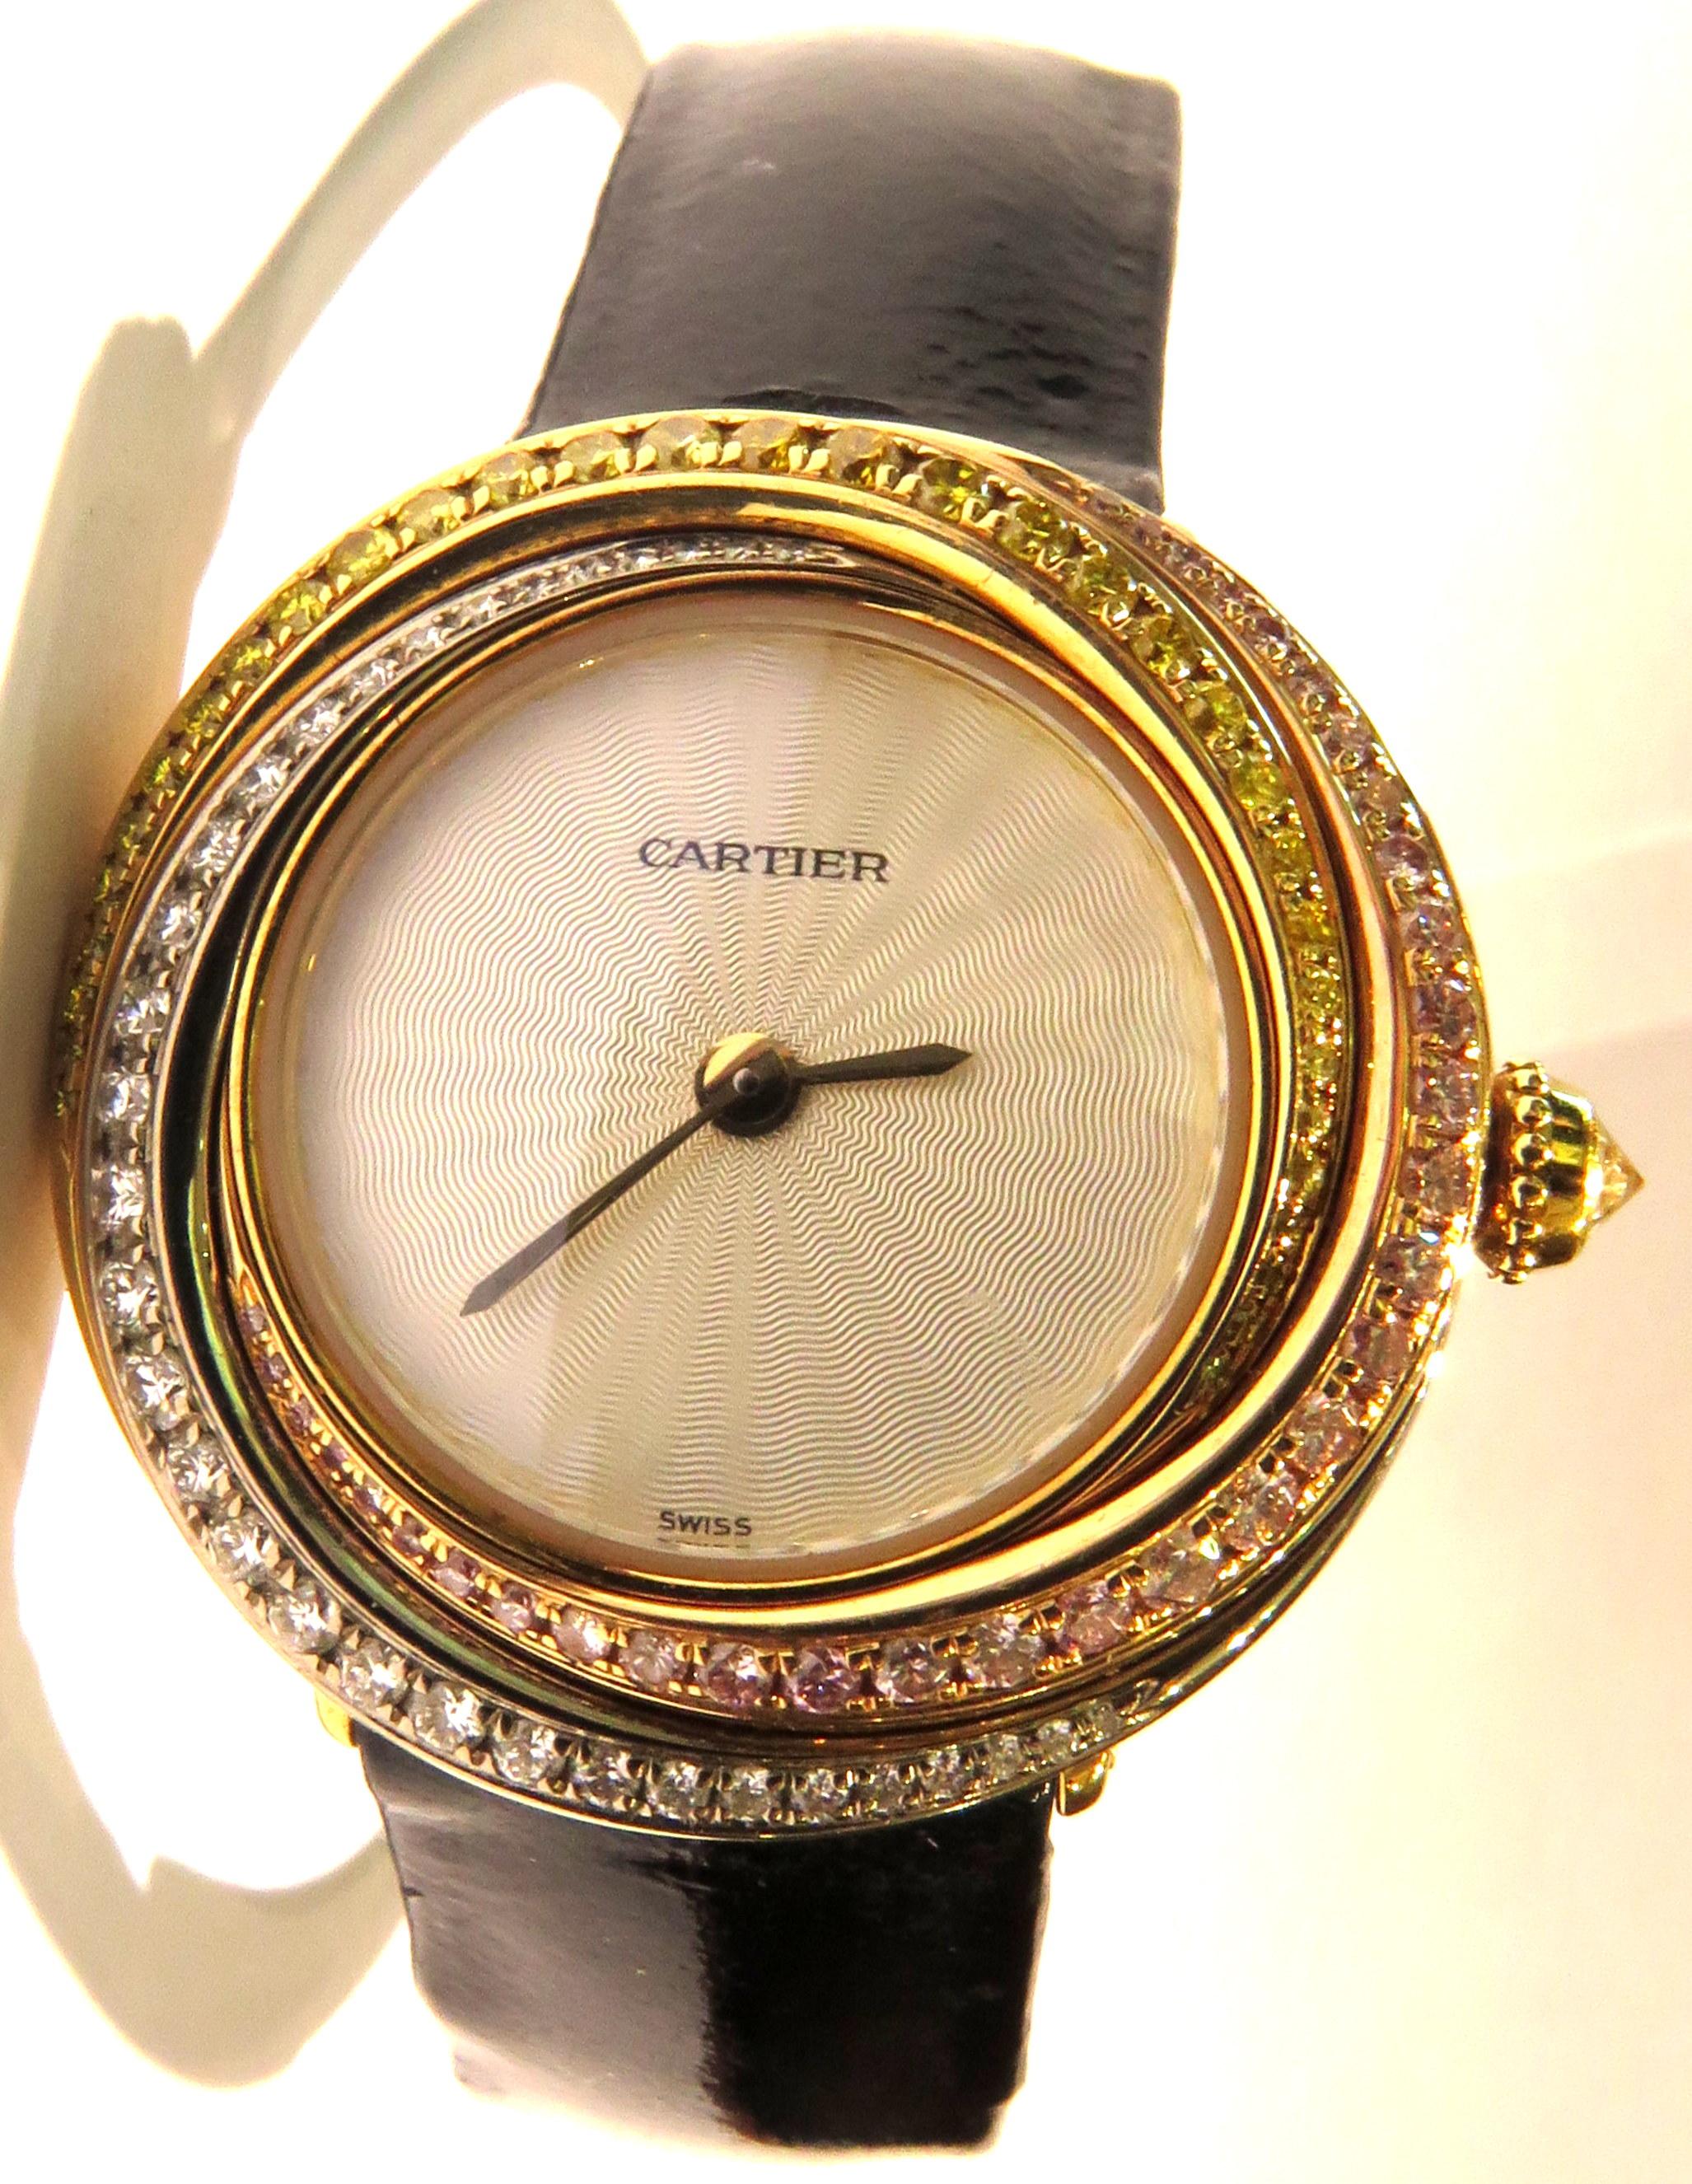 This classic Cartier Trinity quartz watch is chic & sporty! It's set in 18k yellow white & rose gold with fancy color pink yellow and white diamonds. This watch has the original band & deployment buckle. This watch is in very good pre owned